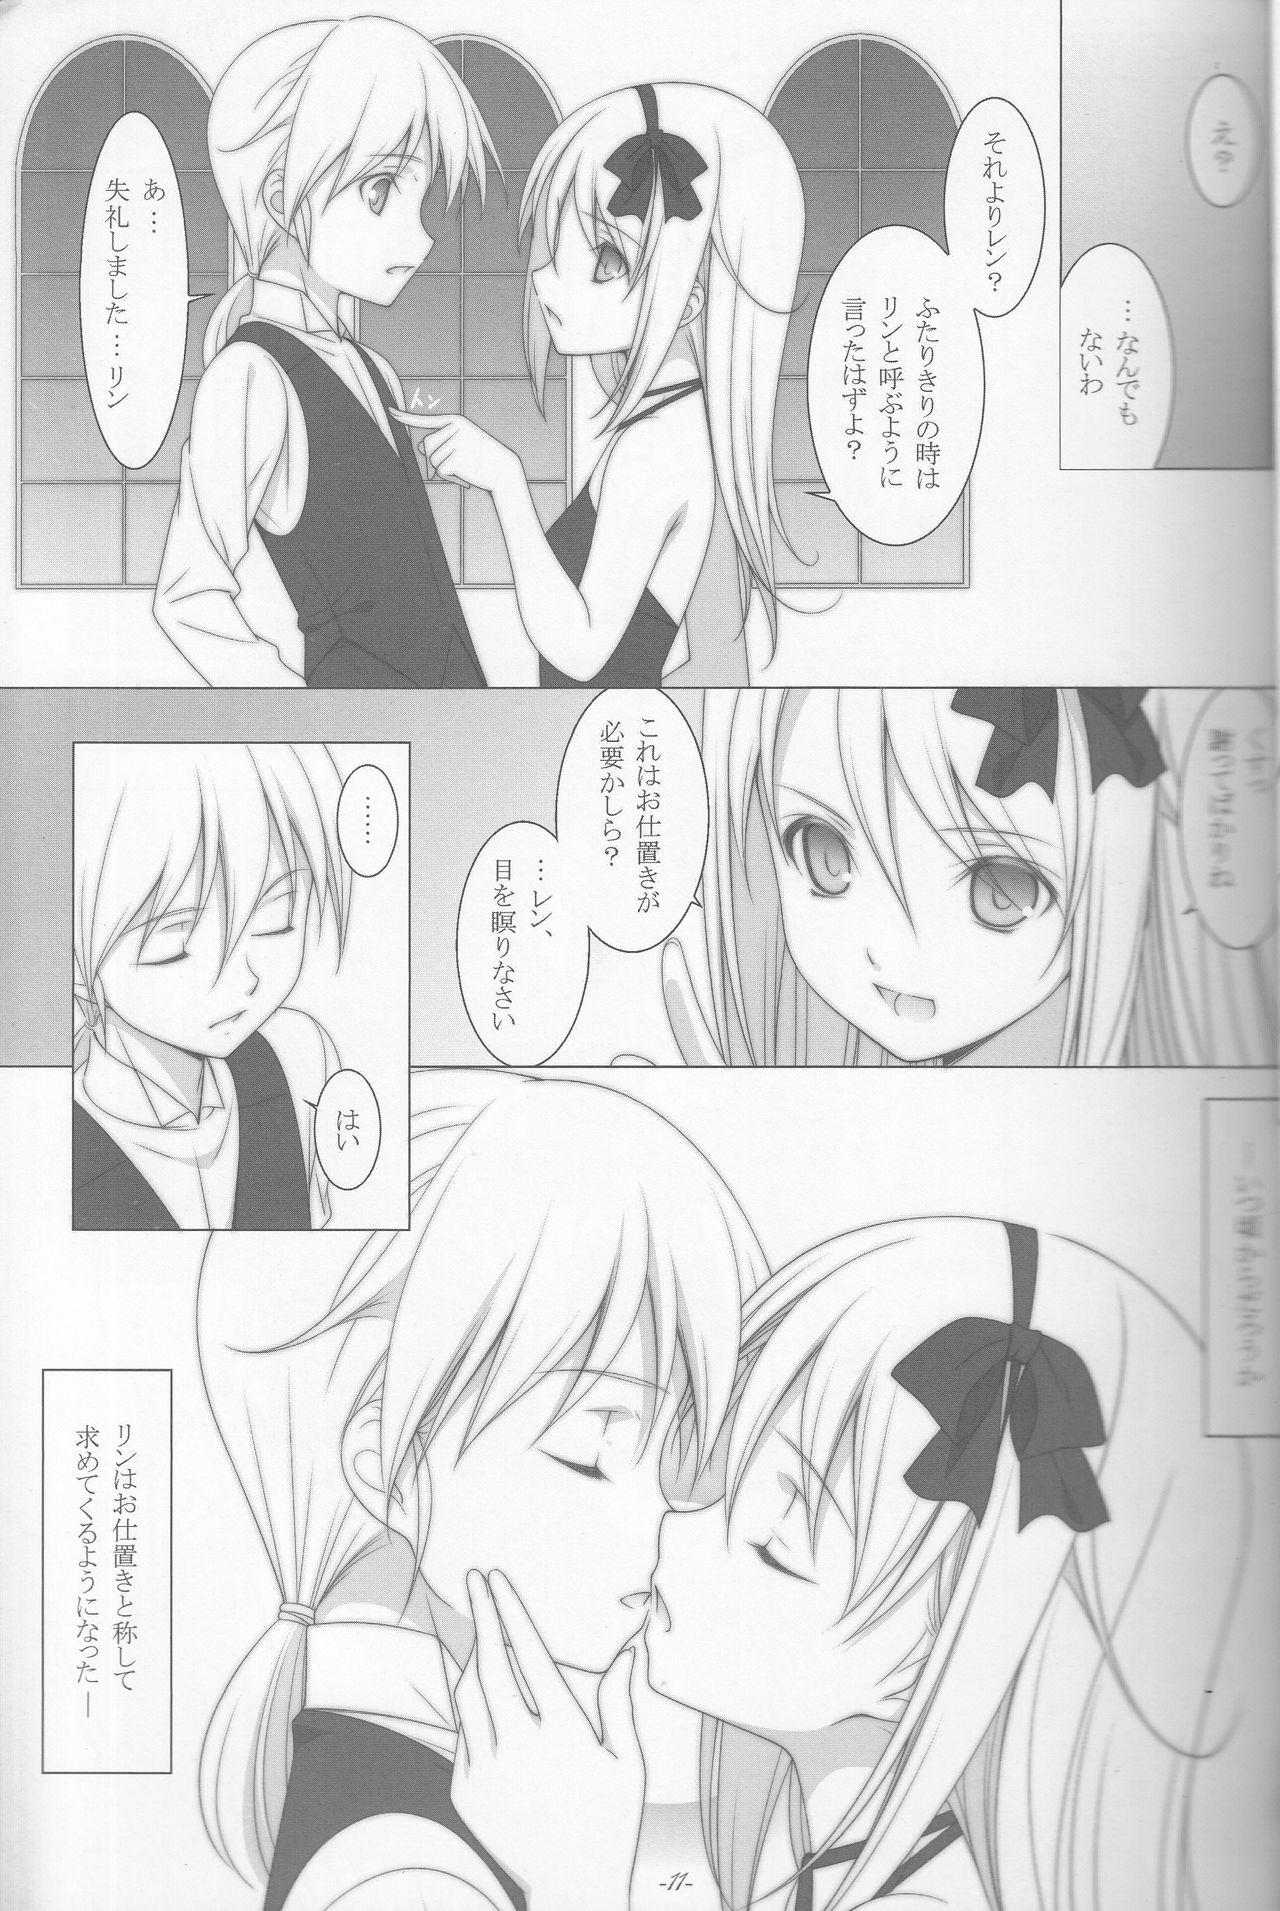 Gaygroup Last Farewell - Vocaloid Best Blowjob - Page 10